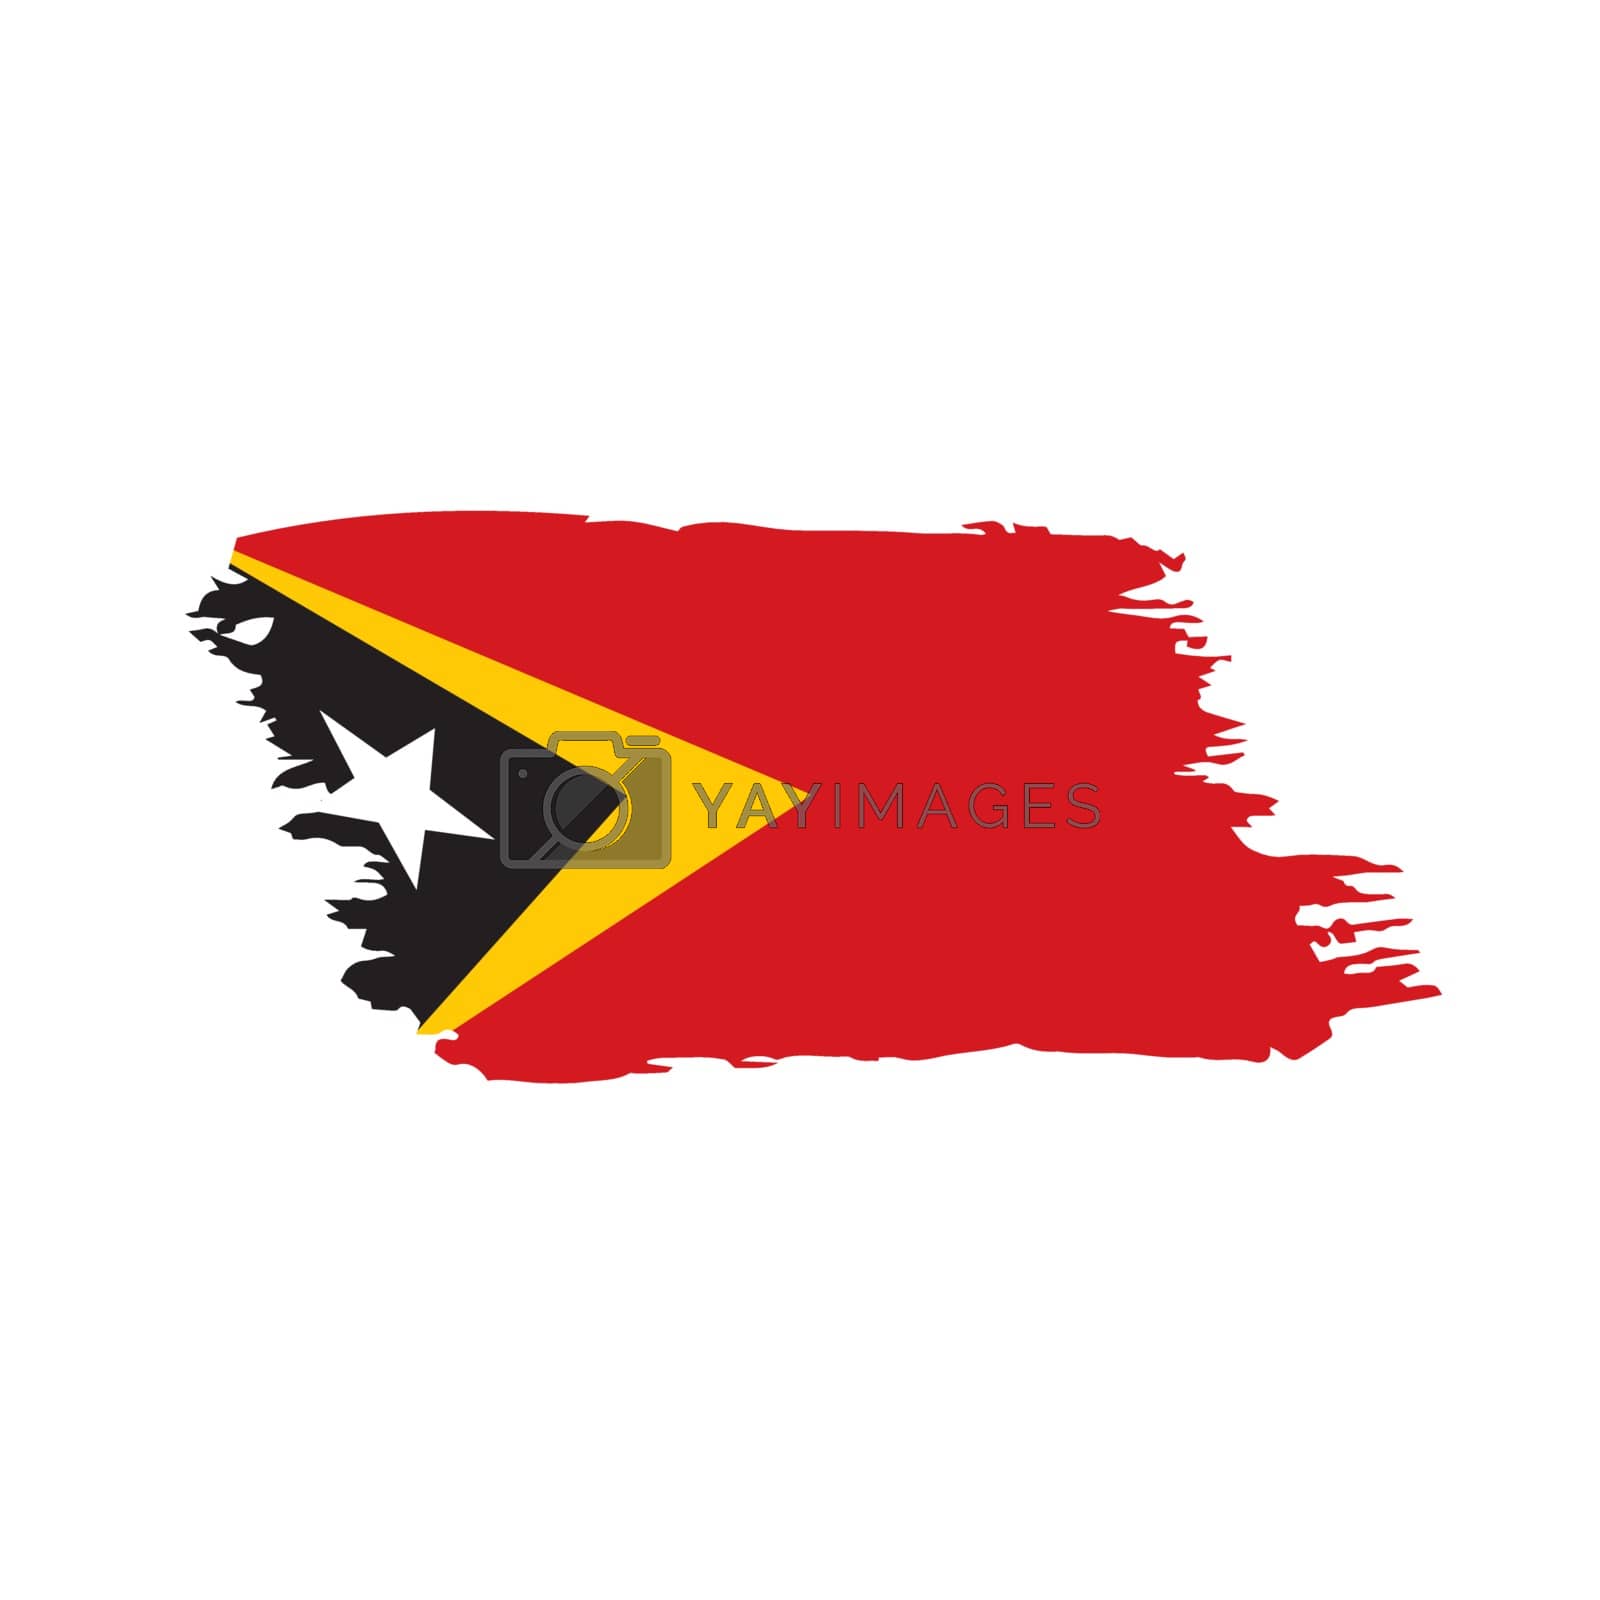 Royalty free image of east timor flag, vector illustration by butenkow